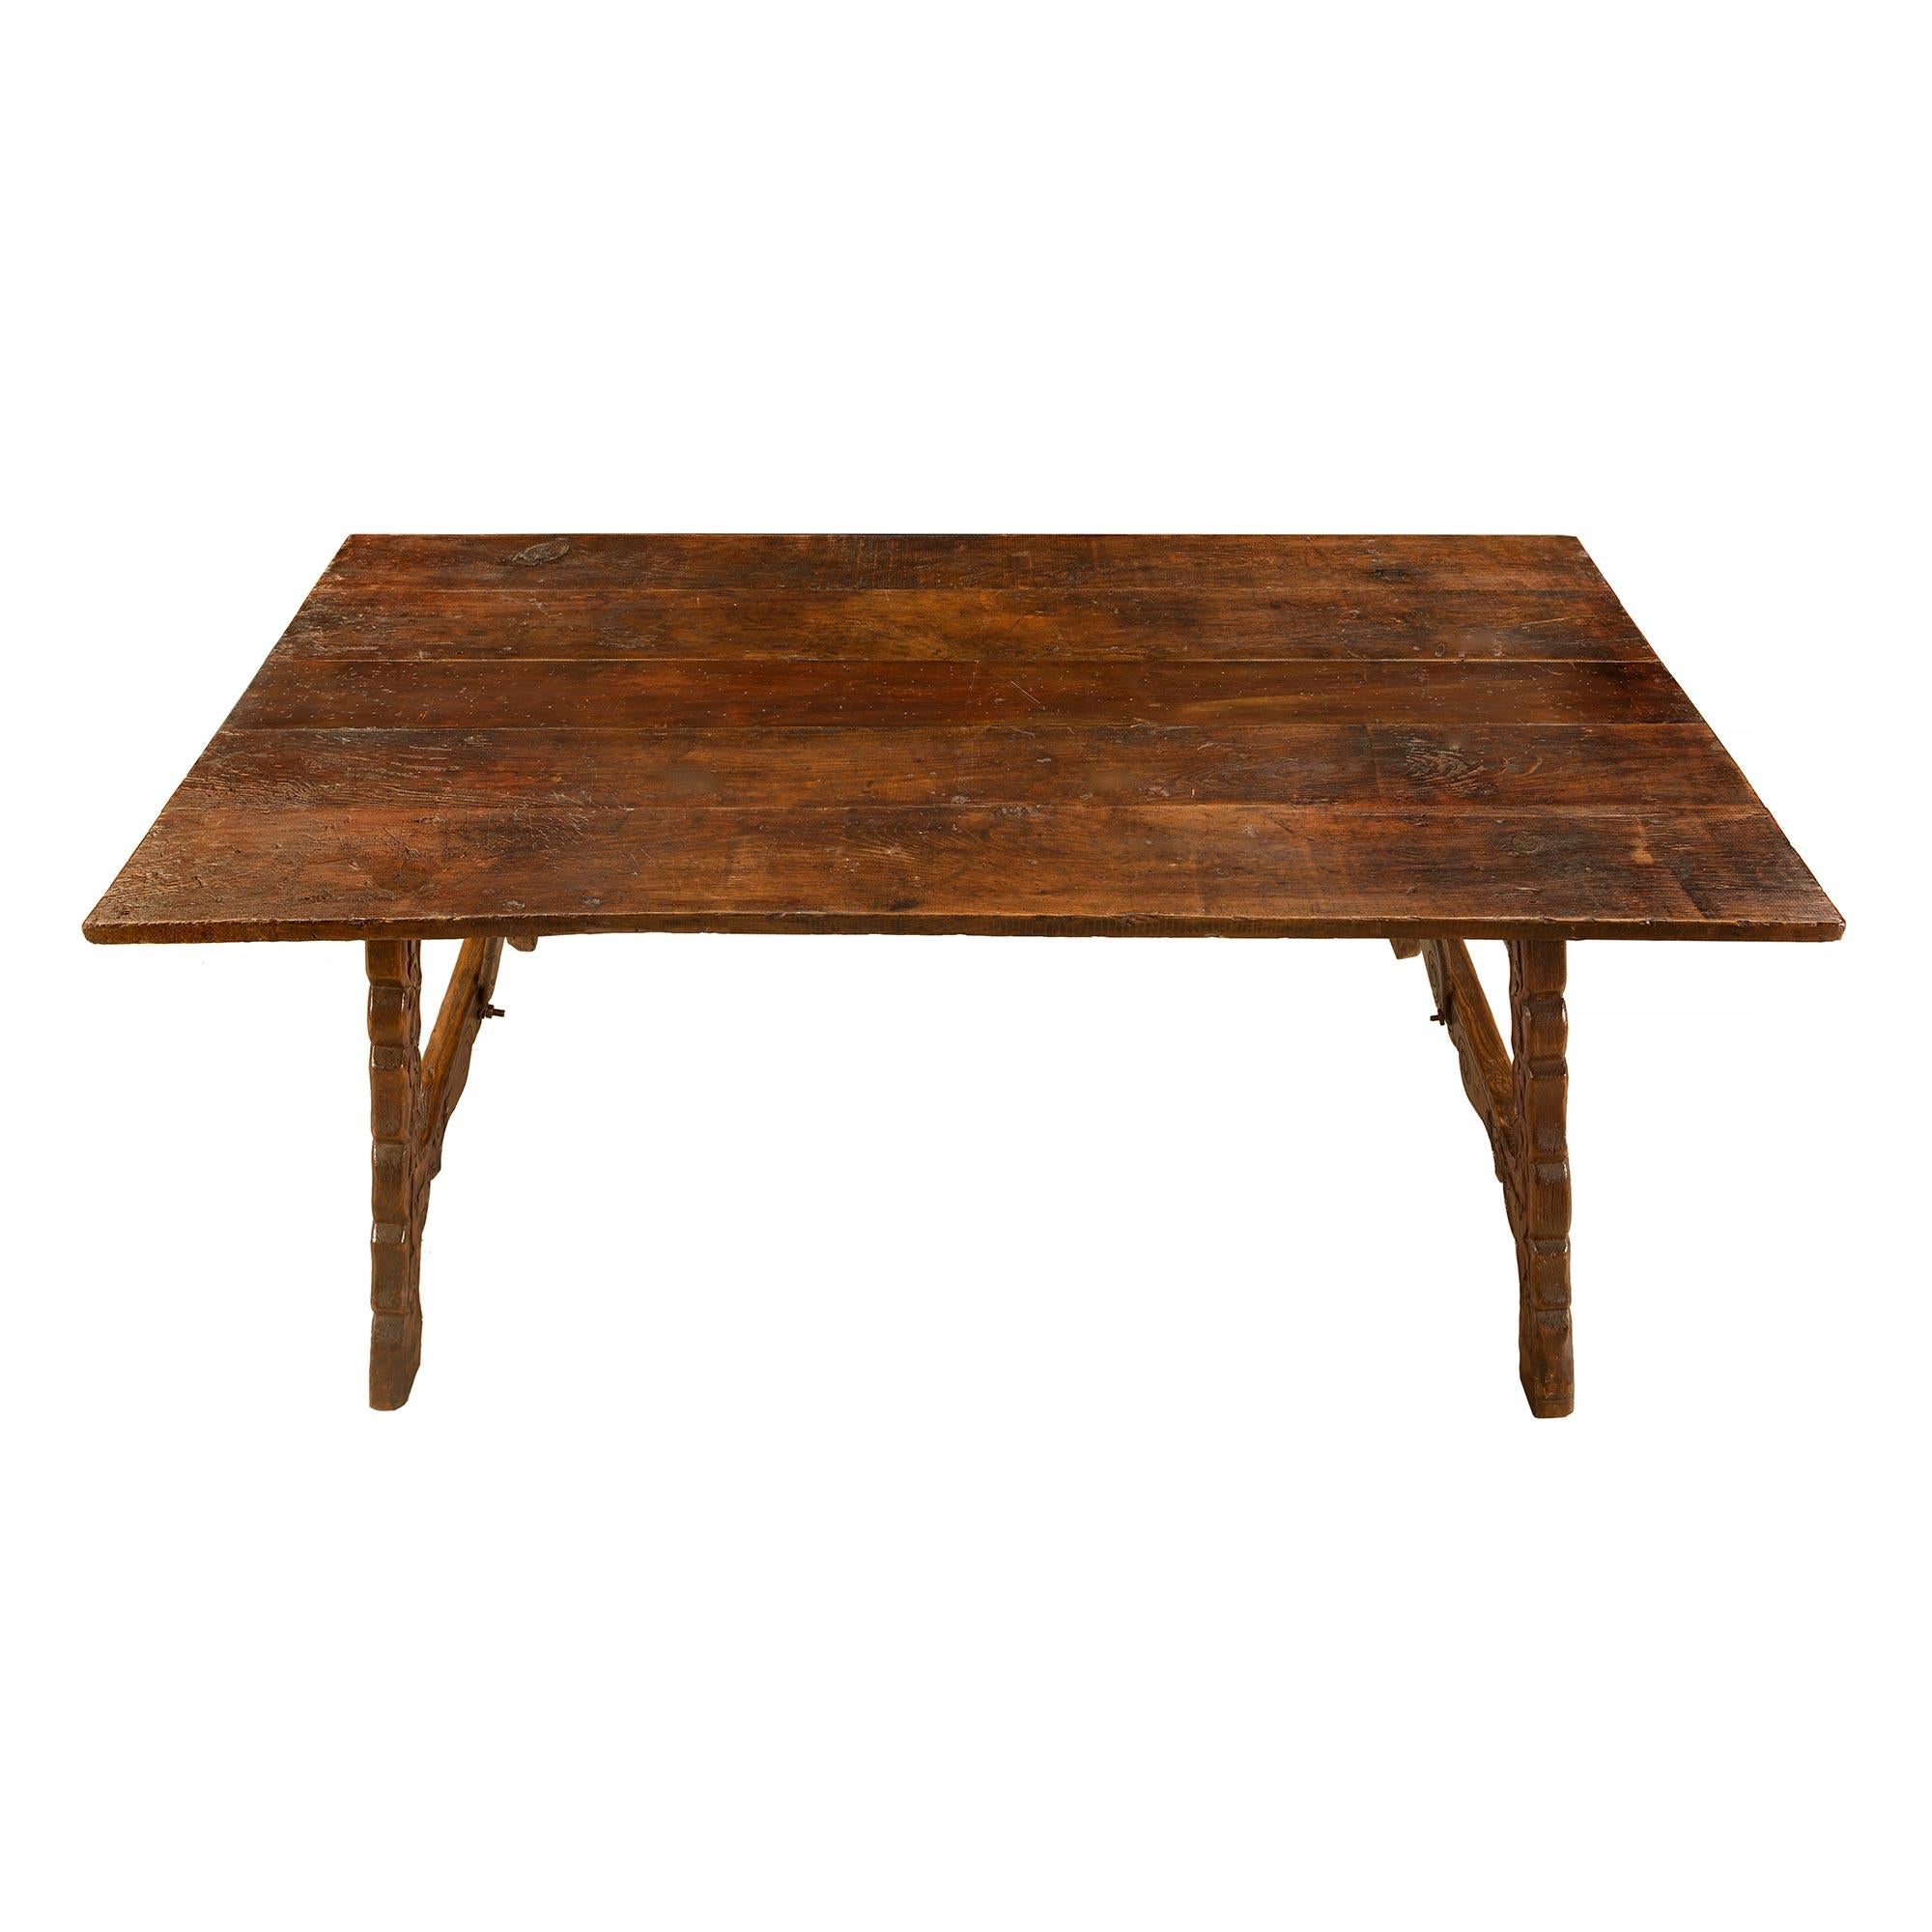 A handsome Spanish mid 19th century Country dining / center table in dark patinated oak. The impressive inclined table supports are decorated with scrolled carved leaves and acorn garlands. Joined by the original 'S' scrolled wrought iron